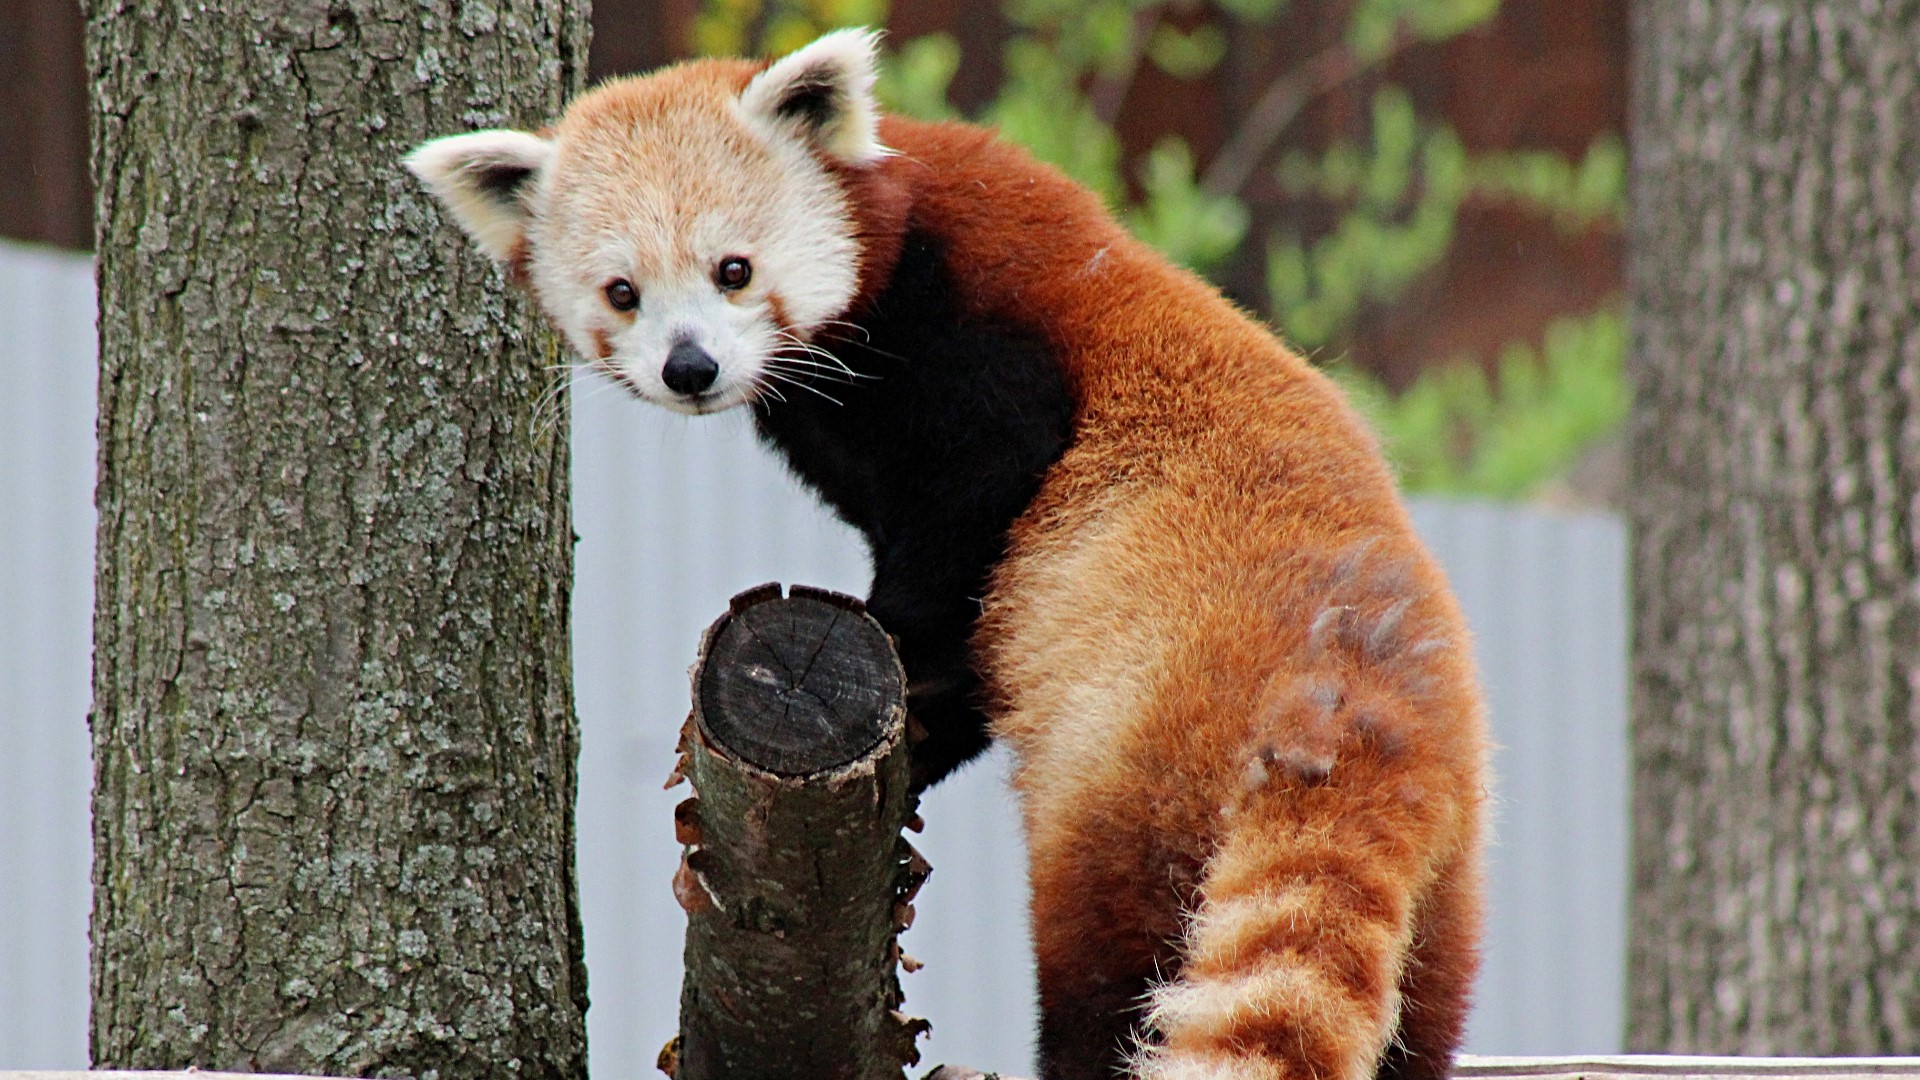 The John Ball Zoo has a new red panda! Her name is Wasabi and she is 2-years-old.